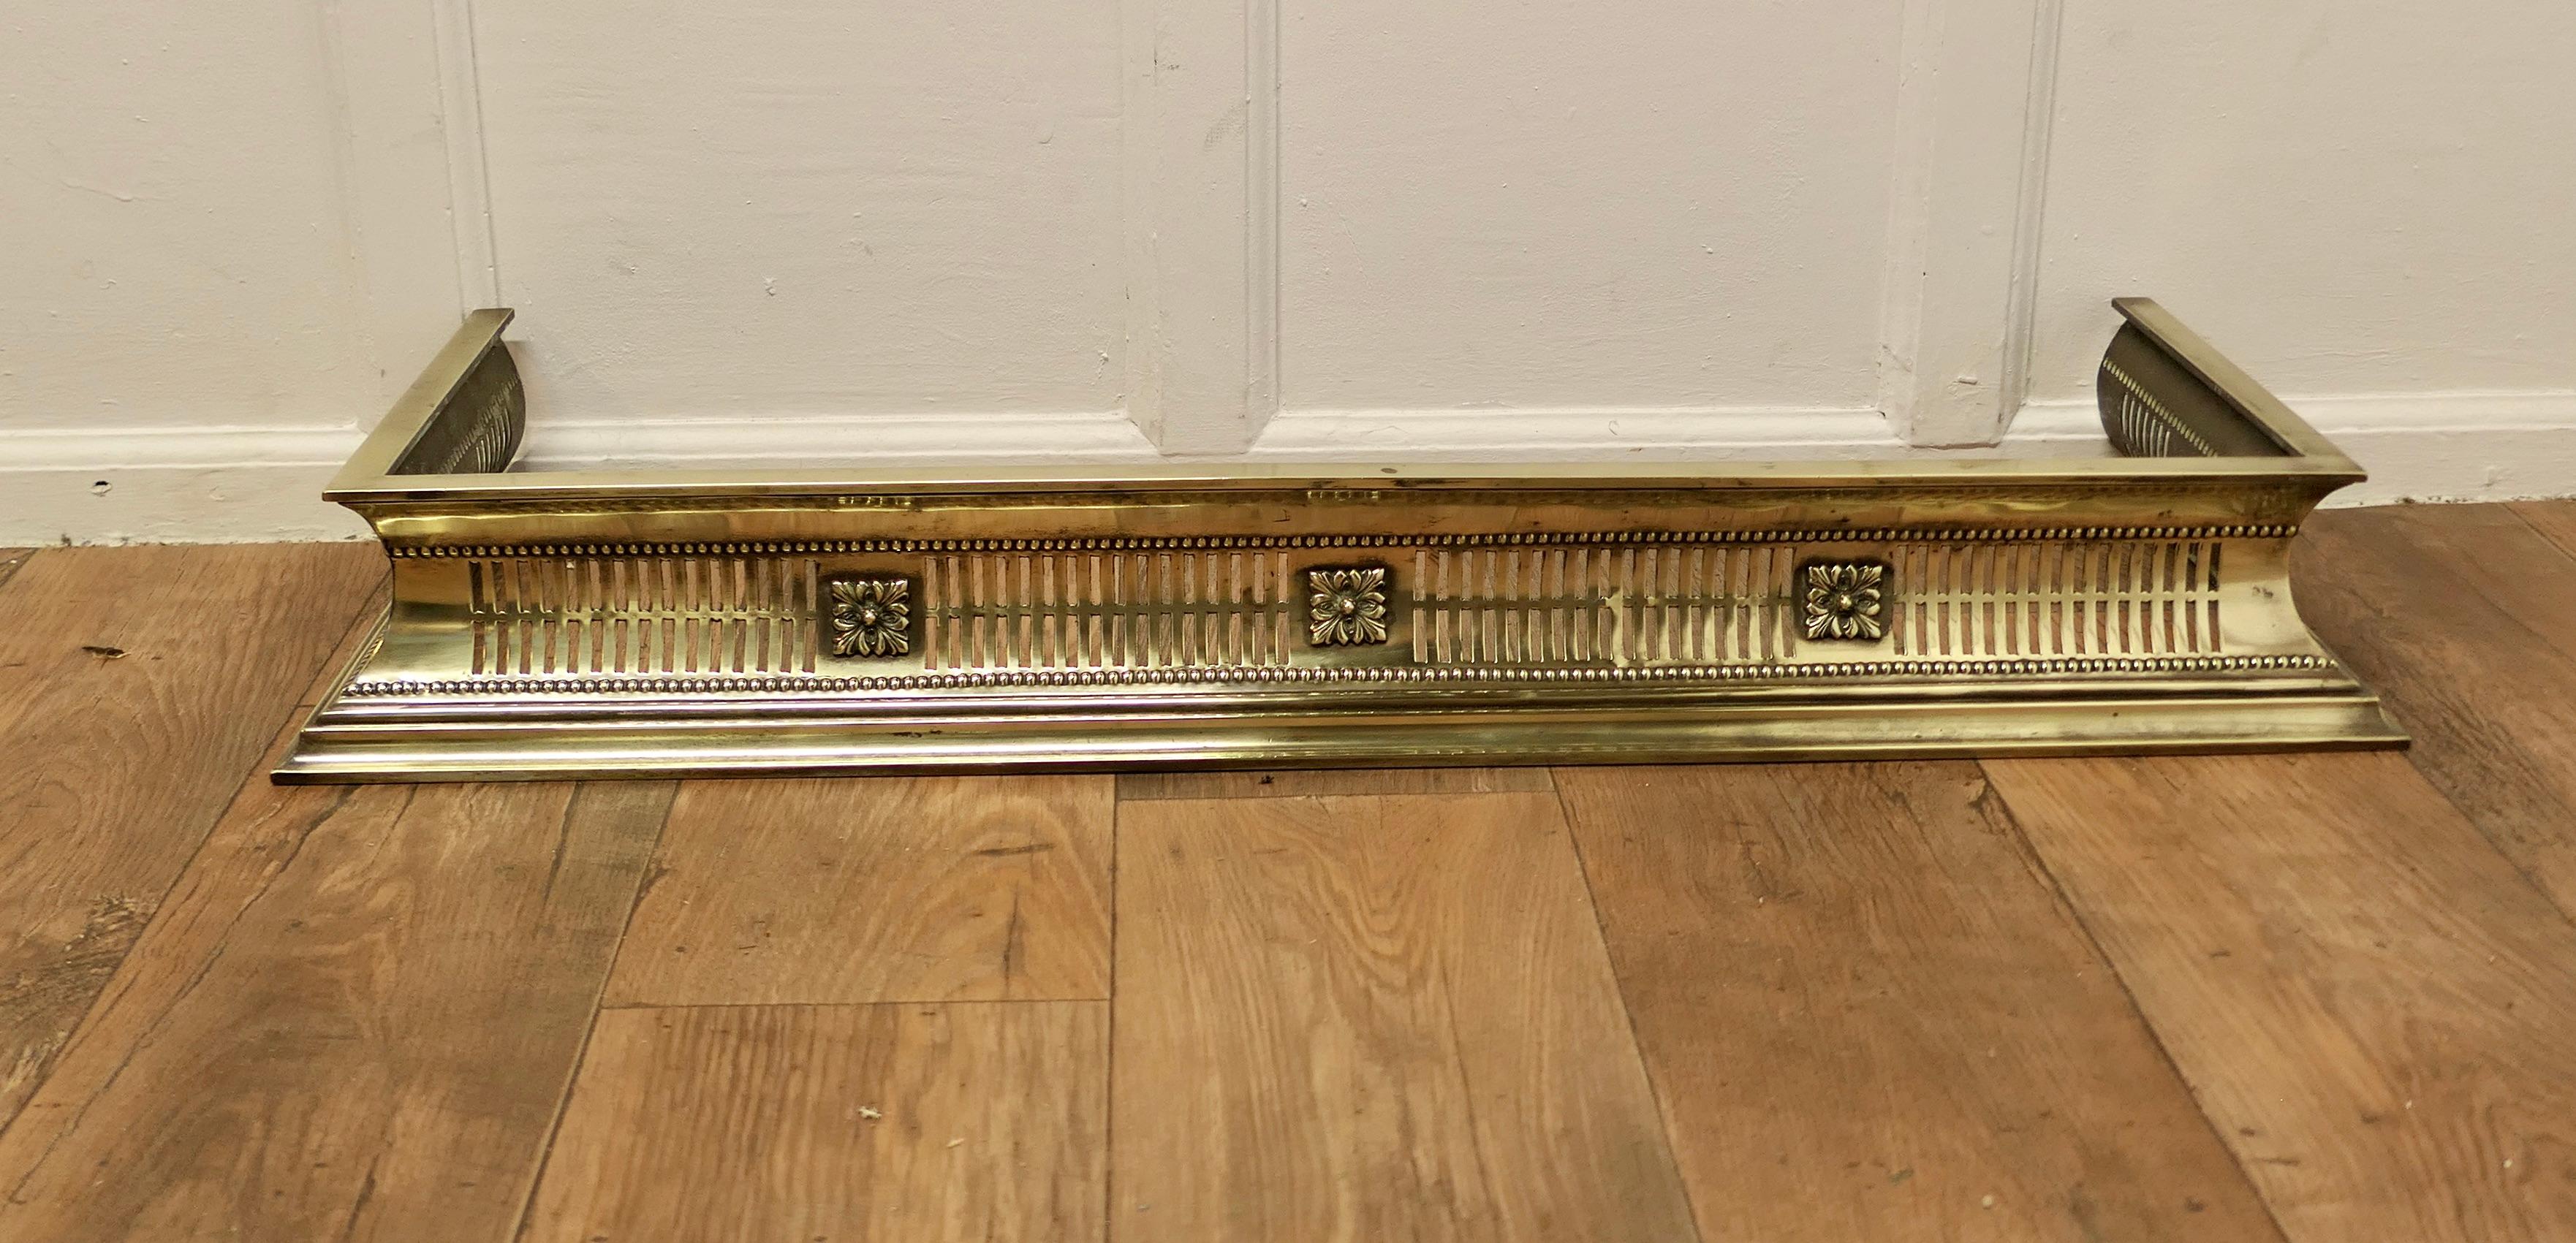 Fine Quality Victorian Pierced Brass Fender

This is a Victorian Pierced Brass Fender it has shaped sides and pierced brass decoration all round with stylised floral motifs
The Fender is in Very good Condition it is 5” high, and 39” long and 13”